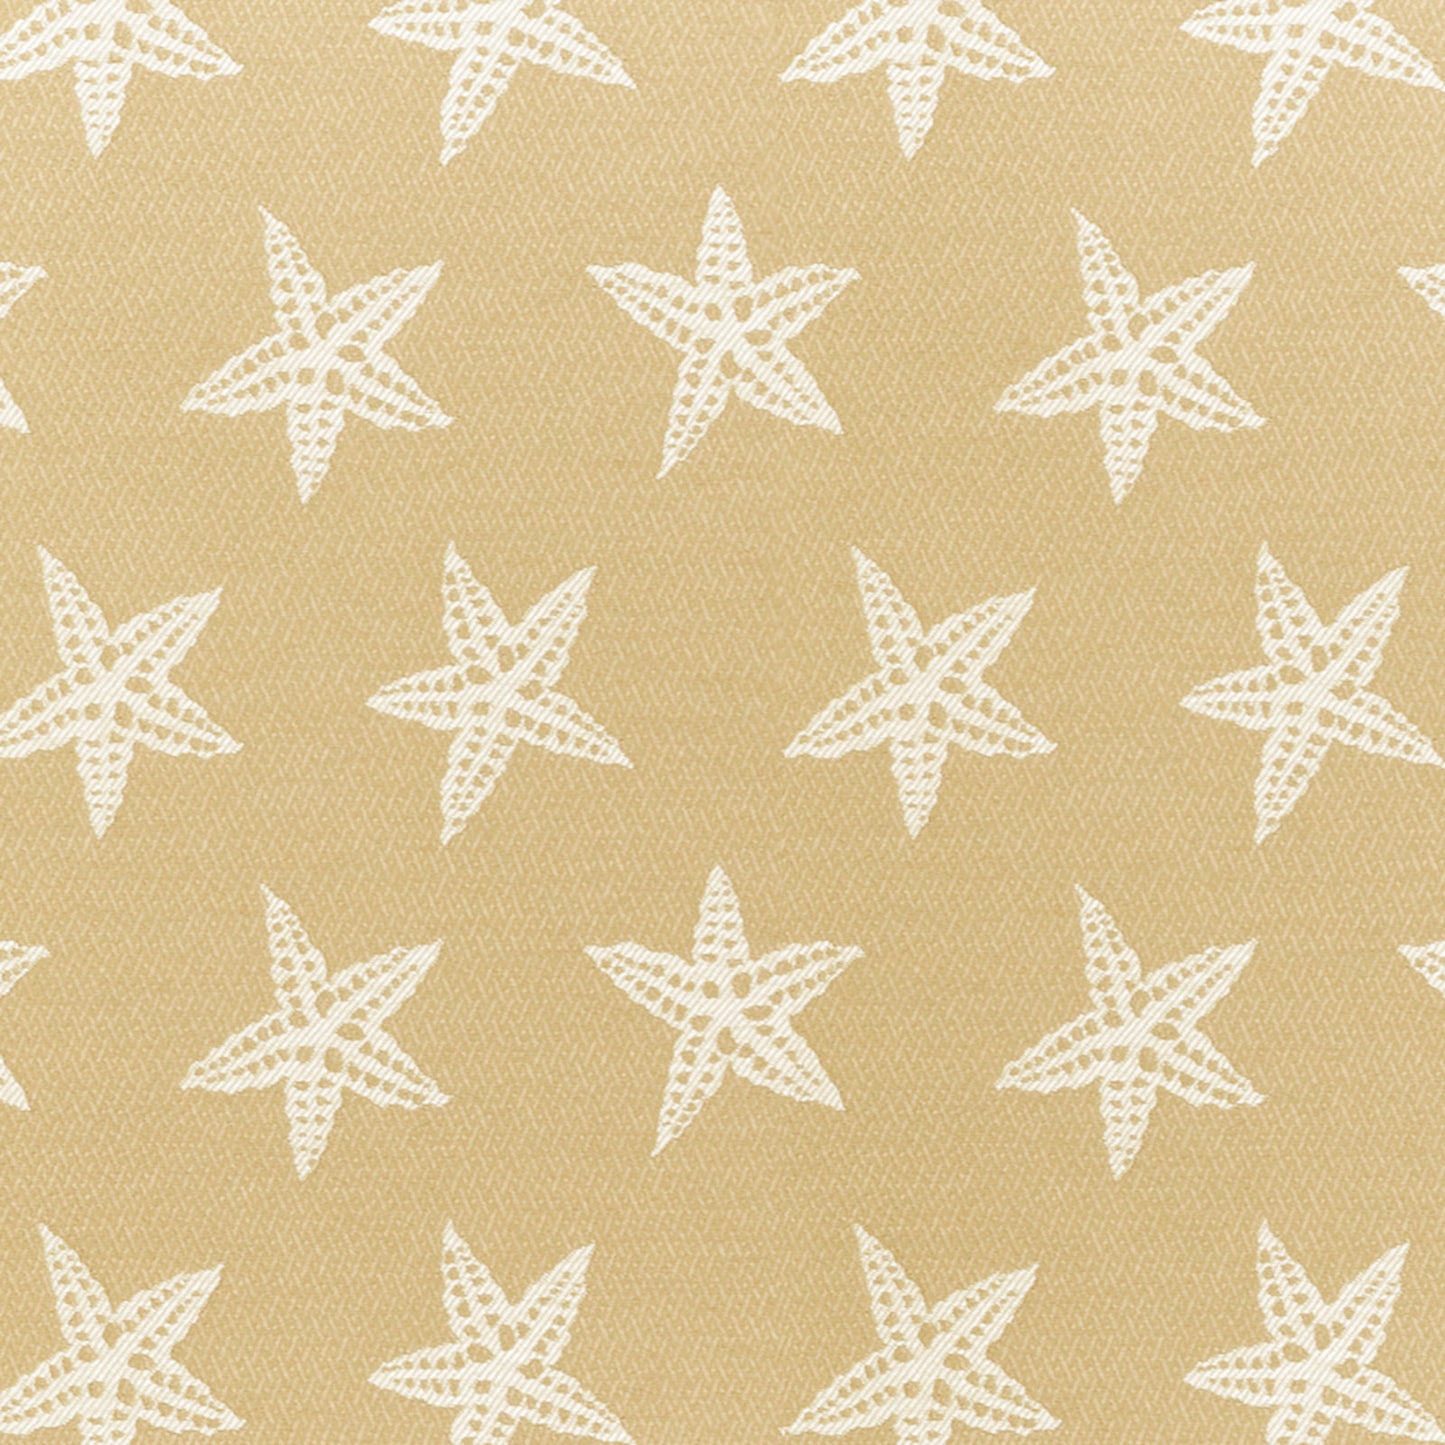 Purchase Greenhouse Fabric A8063 Sand